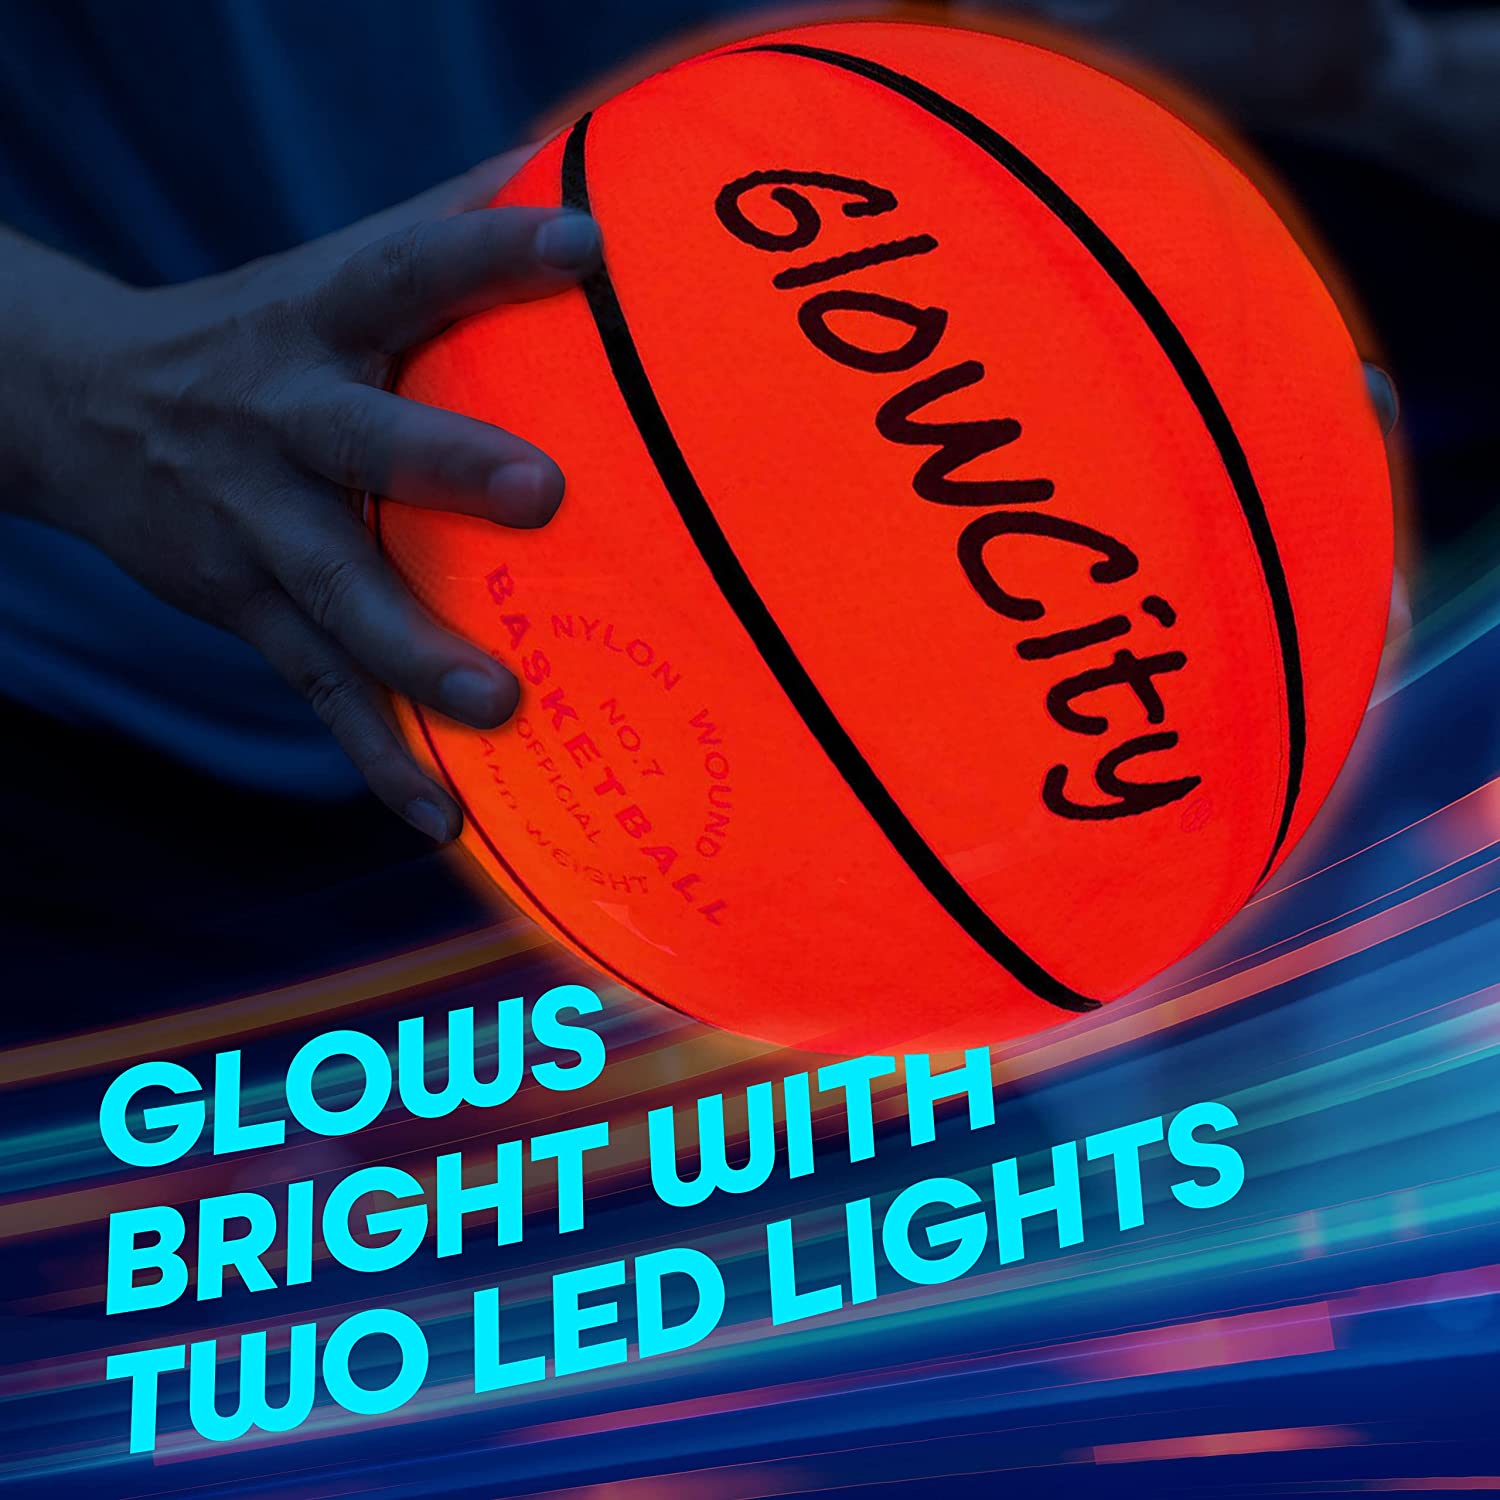 A close-up view of a Glowcity glow in the dark basketball which is lit up.